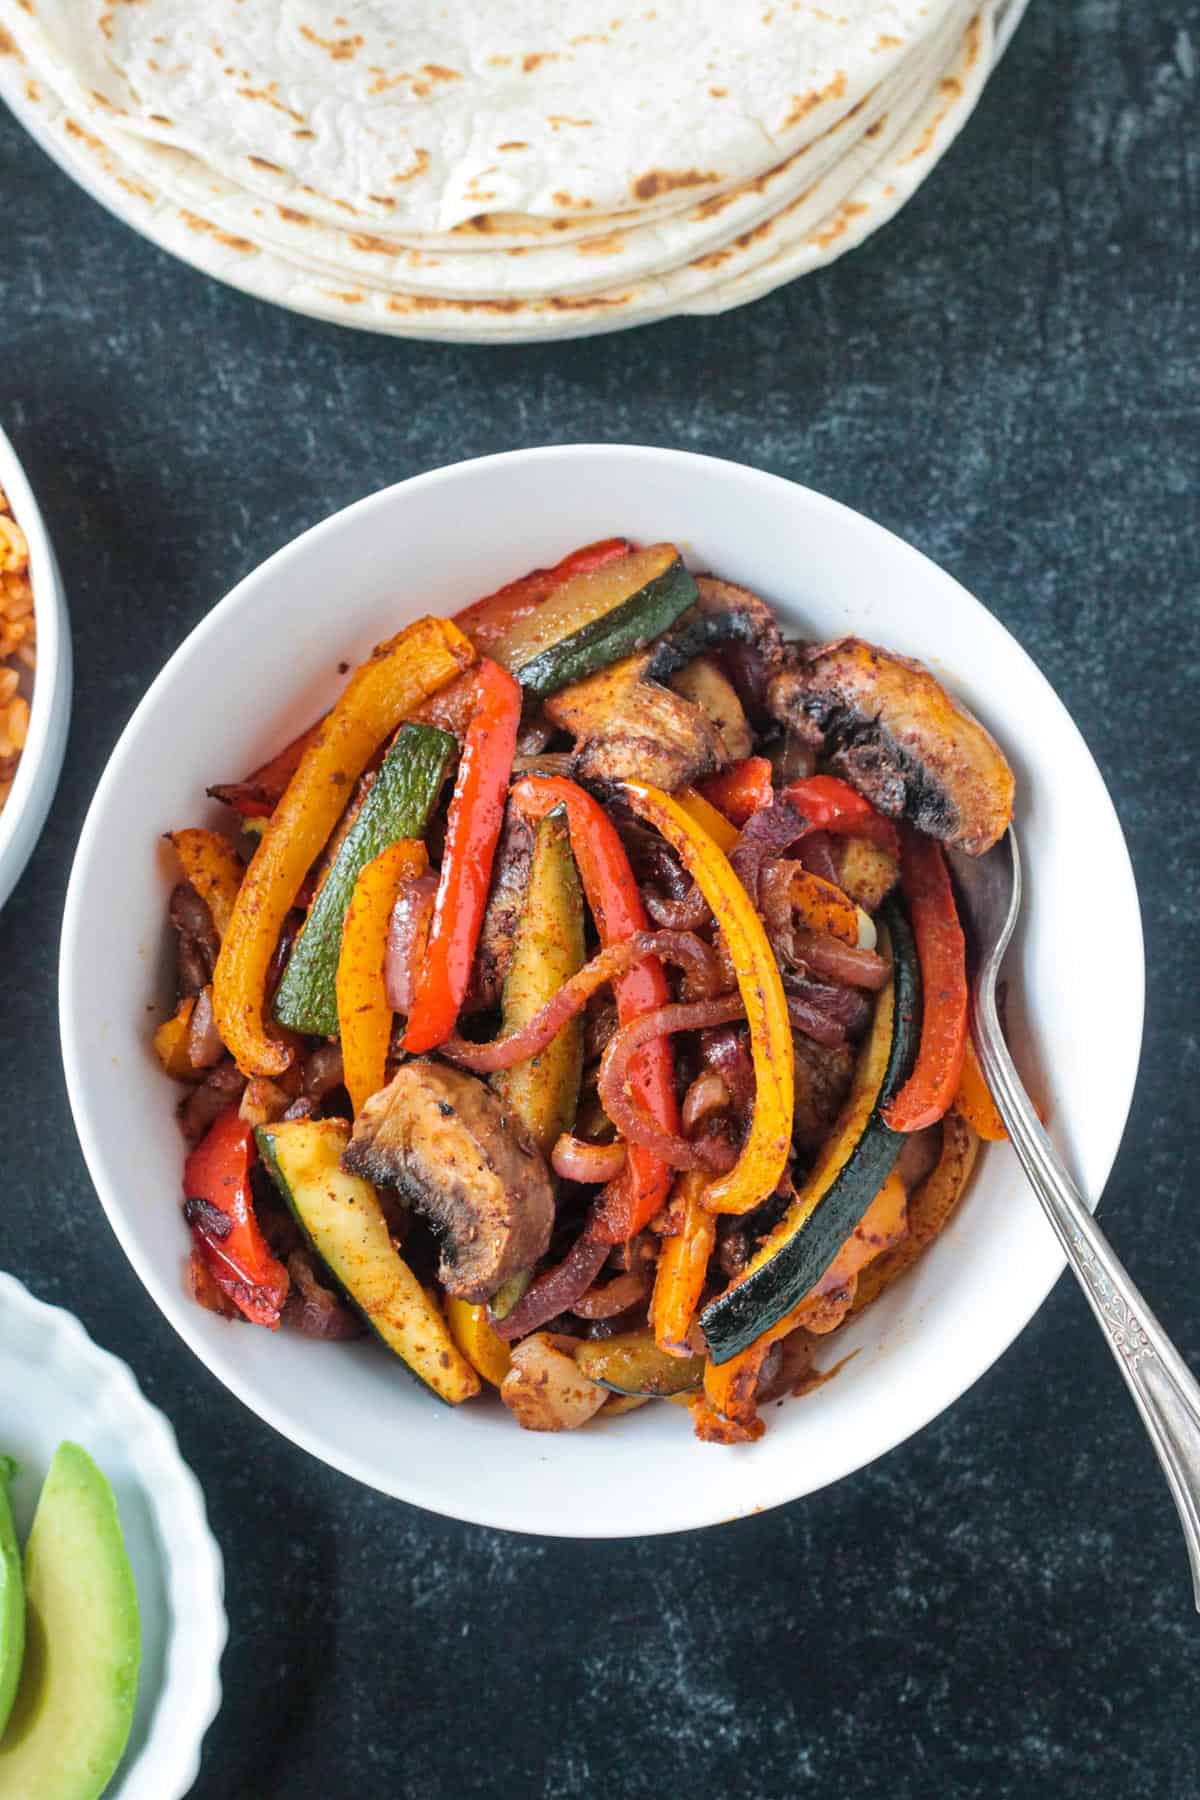 Roasted fajita veggies in a serving bowl with a spoon.